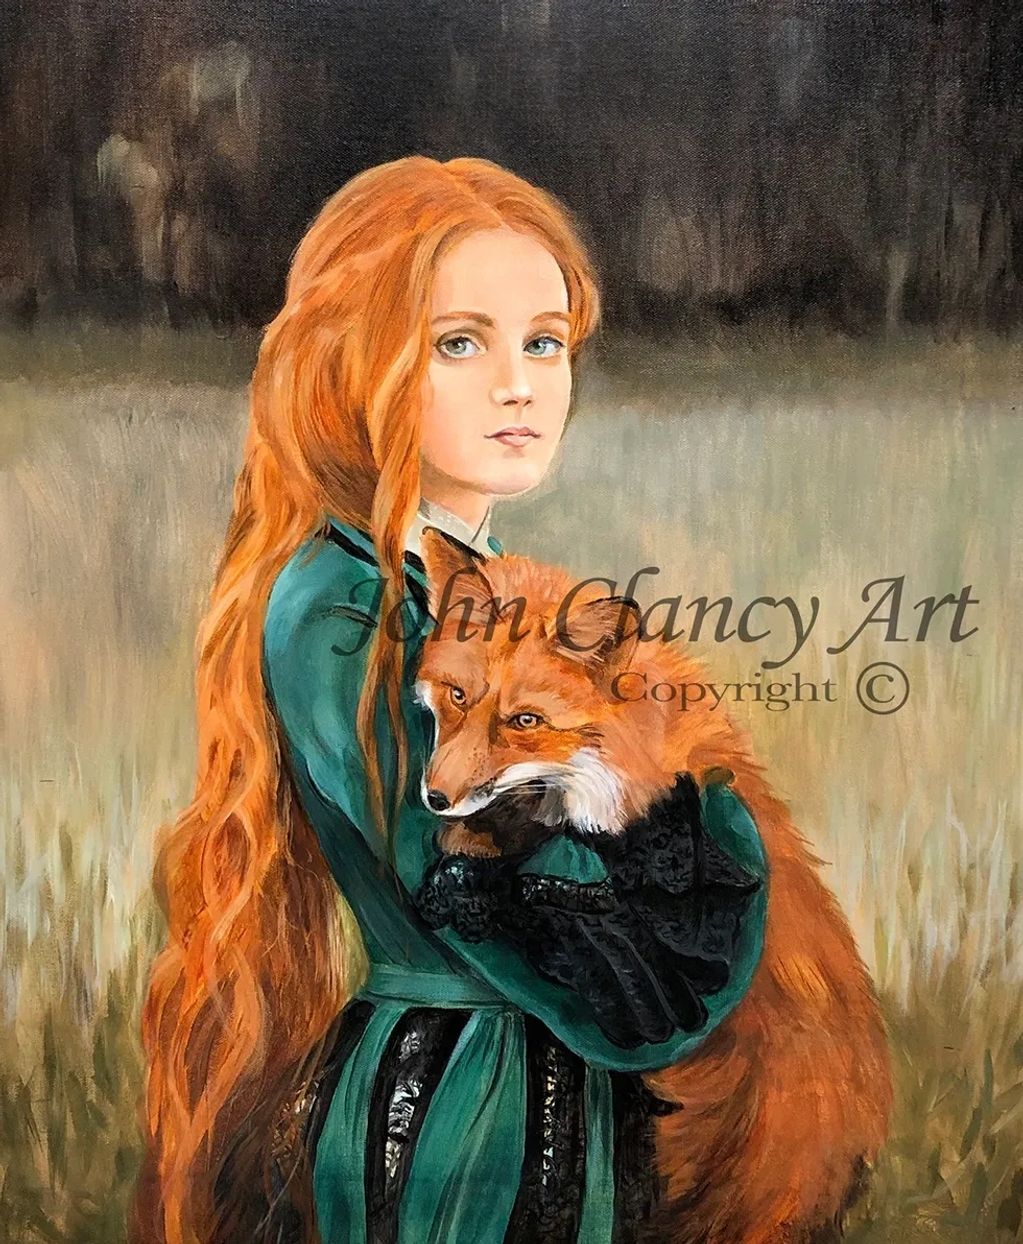 Painting by John Clancy of a young girl and a fox.